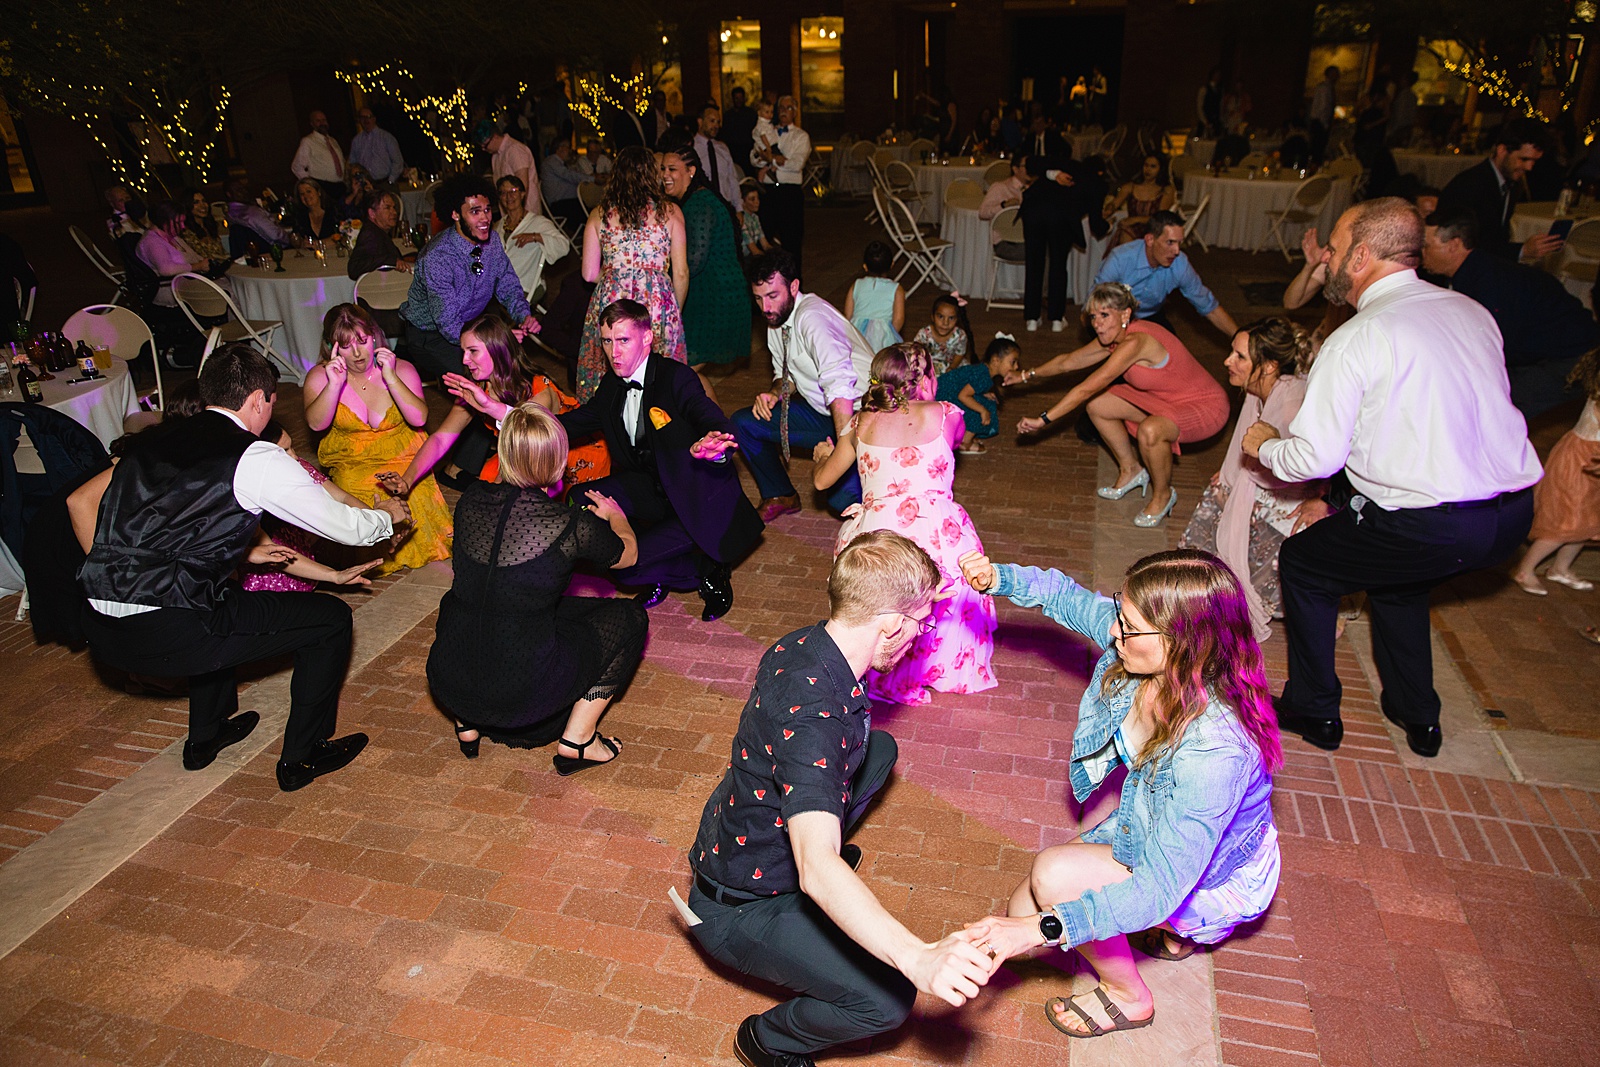 Guests dancing together at Arizona Historical Society wedding reception by Tempe wedding photographer PMA Photography